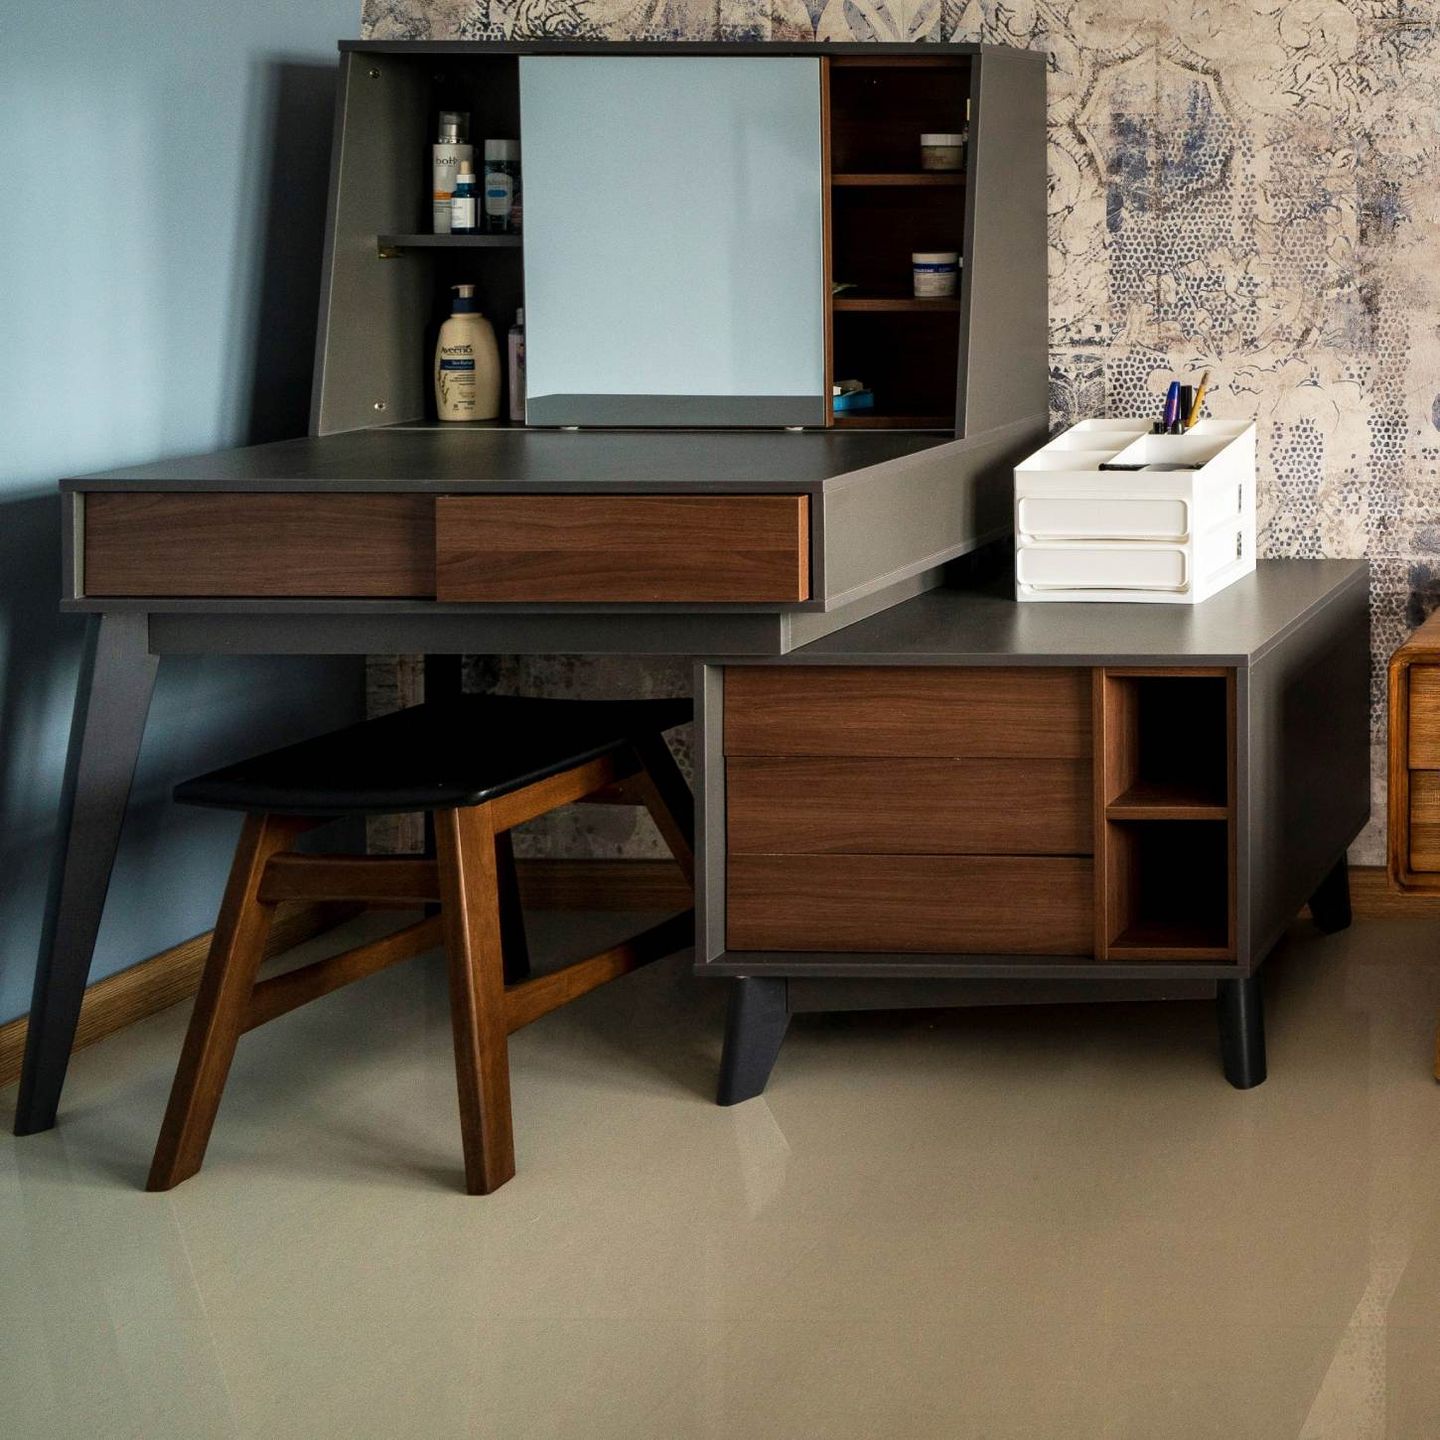 Light Brown Flooring With A Glossy Finish - Livspace